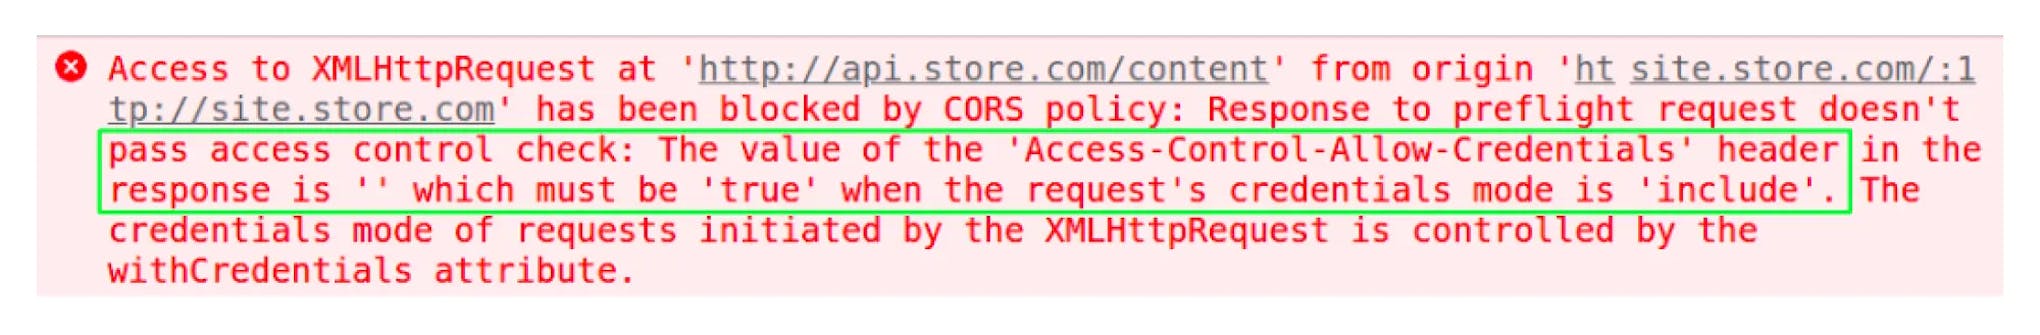 If there is no Access-Control-Allow-Credentials header, then you can get an error: